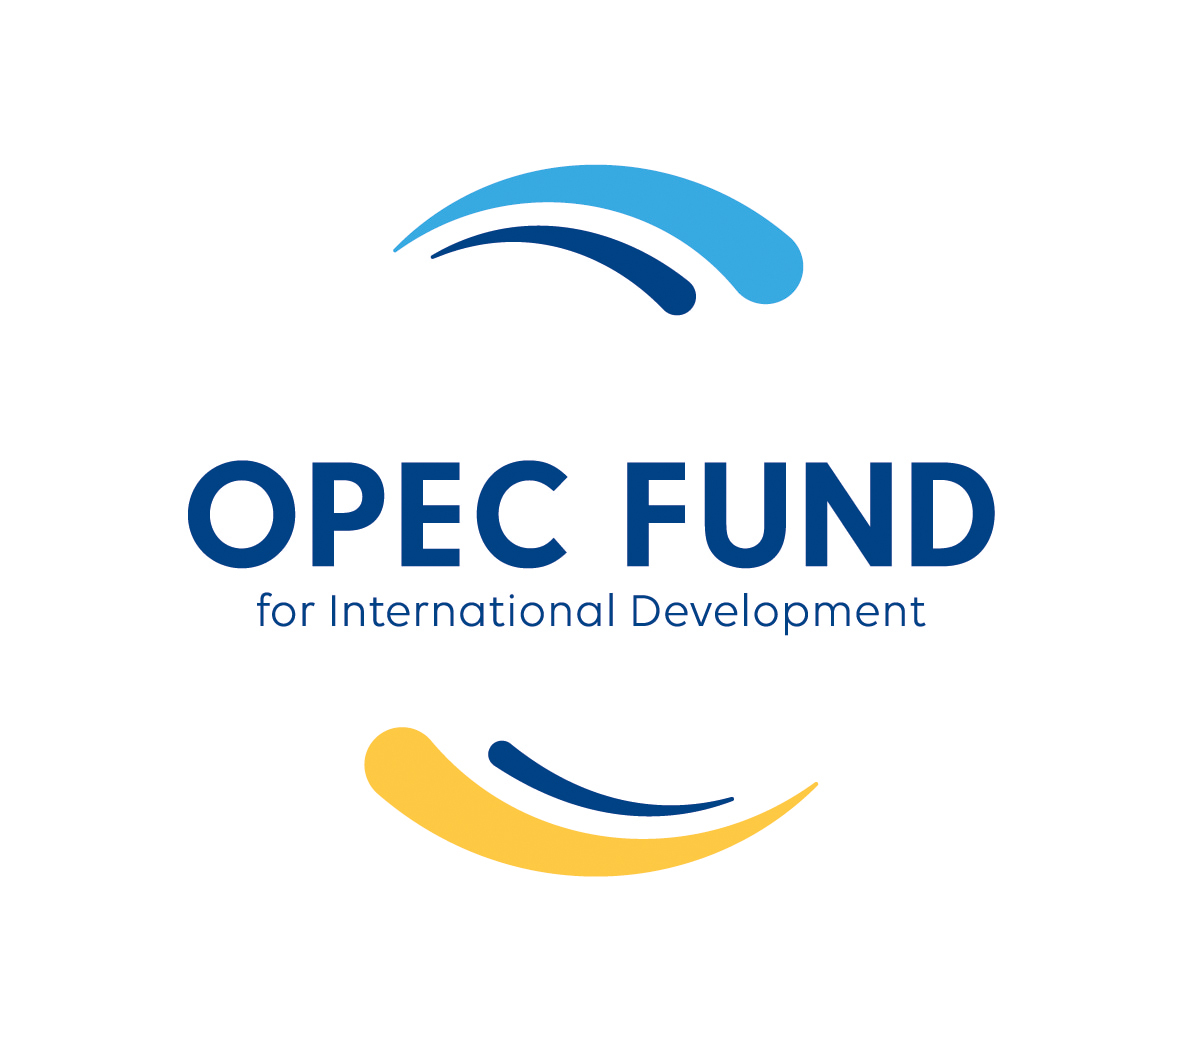 OPEC Fund Supports Post-COVID-19 African Infrastructure With $50m Loan to Africa Finance Corporation